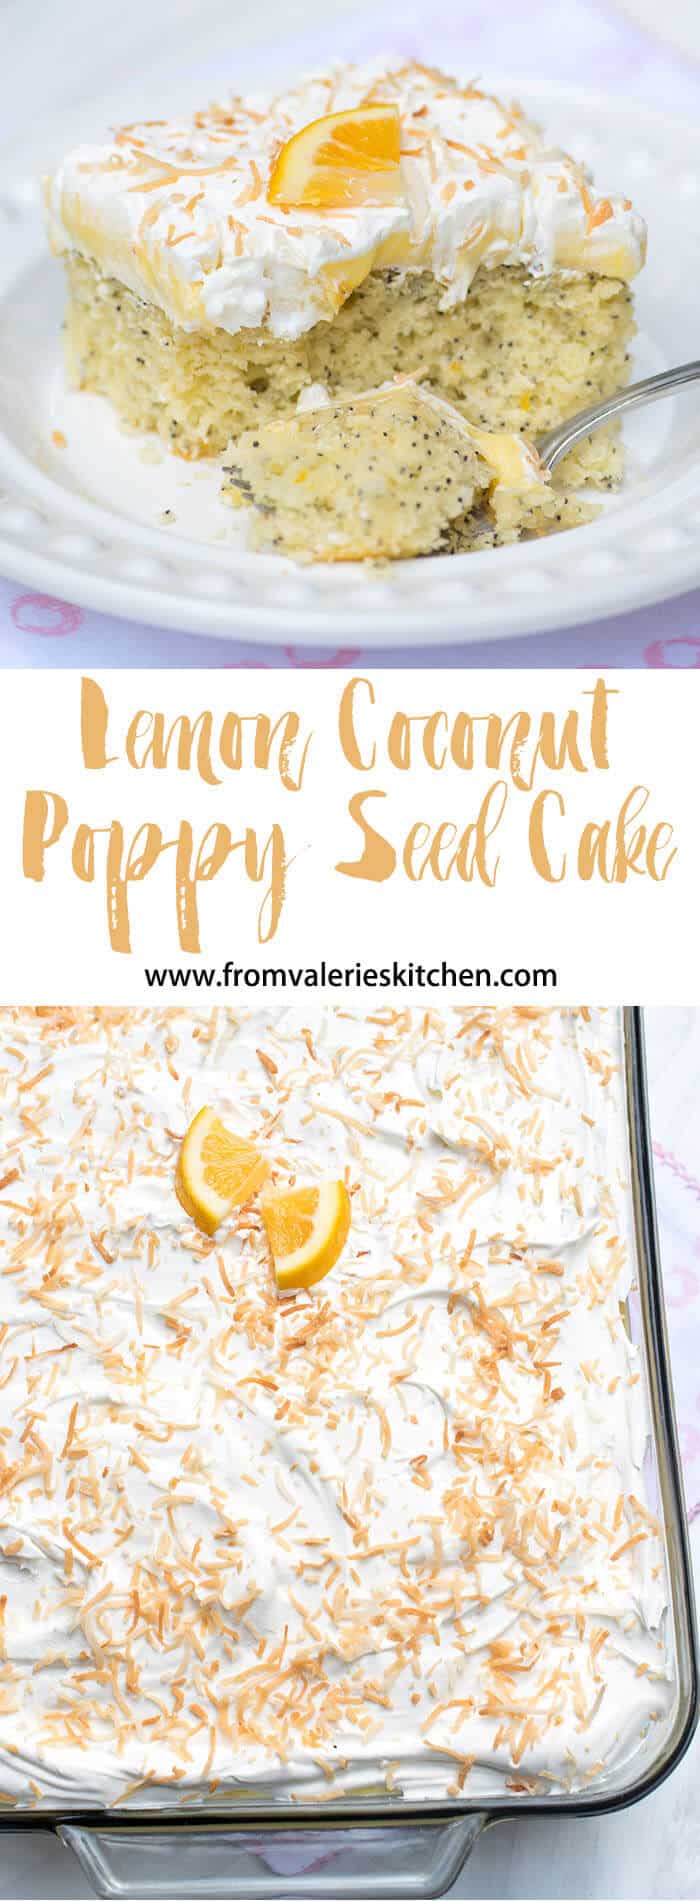 A two image vertical collage of Lemon Coconut Poppy Seed Cake with overlay text.